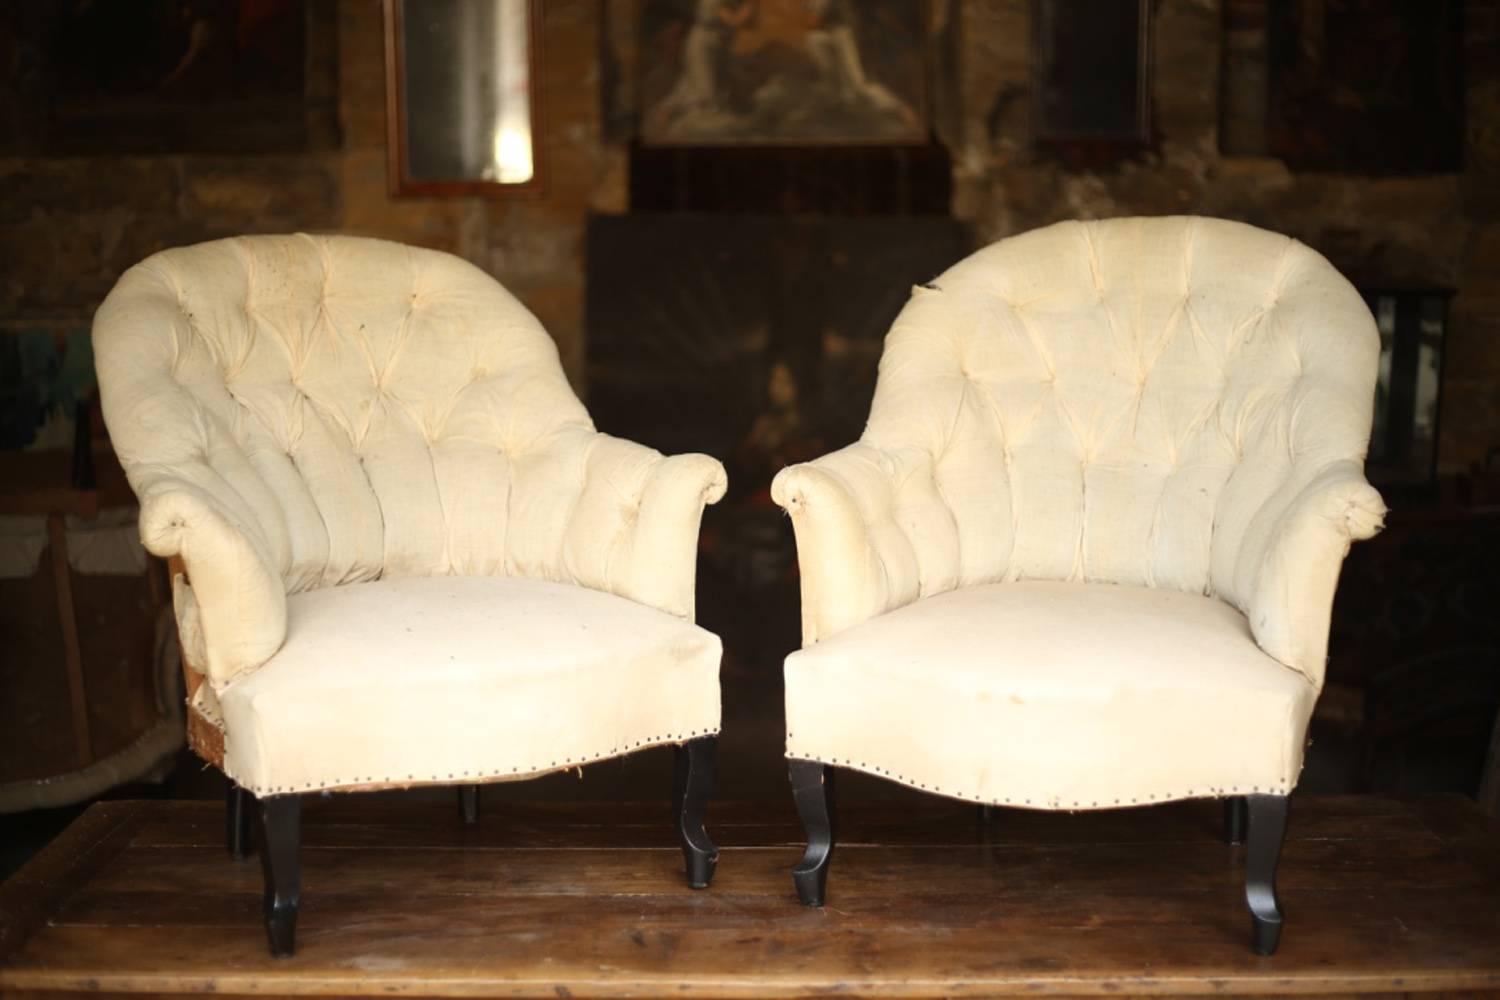 These are a gorgeous pair Napoleon III armchairs with buttoned back. They are in fully restored condition and are now ready for reupholstery. They retain their original calico and horse hair stuffing. The shape of these chairs is very stylish,